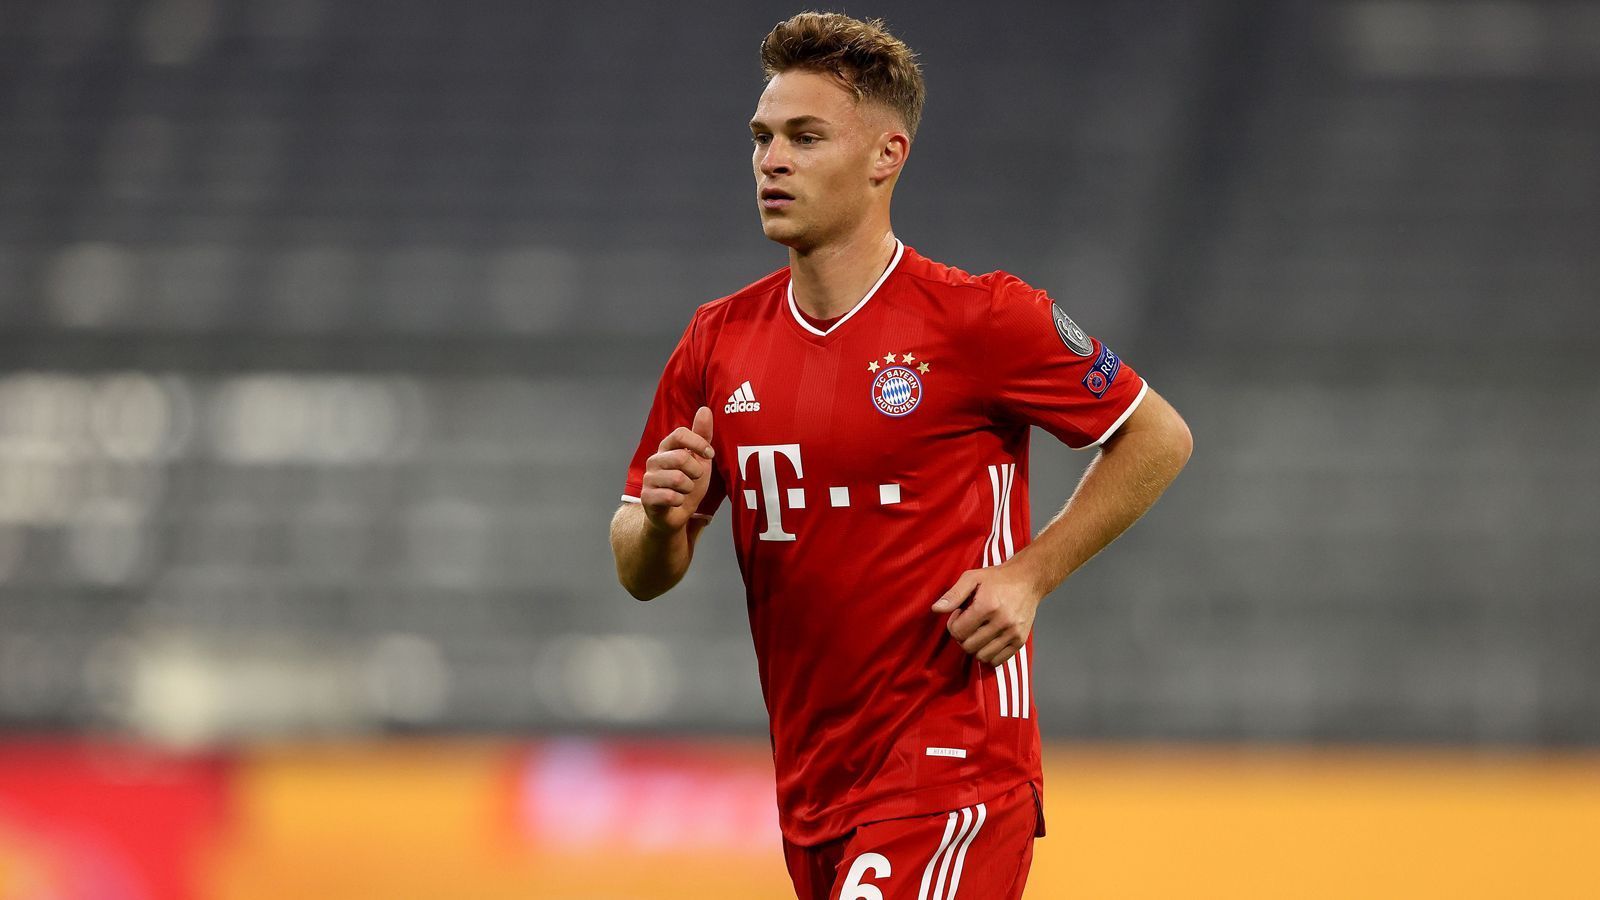 
                <strong>Joshua Kimmich (FC Bayern München)</strong><br>
                Position: Abwehr - Alter: 25 Jahre
              